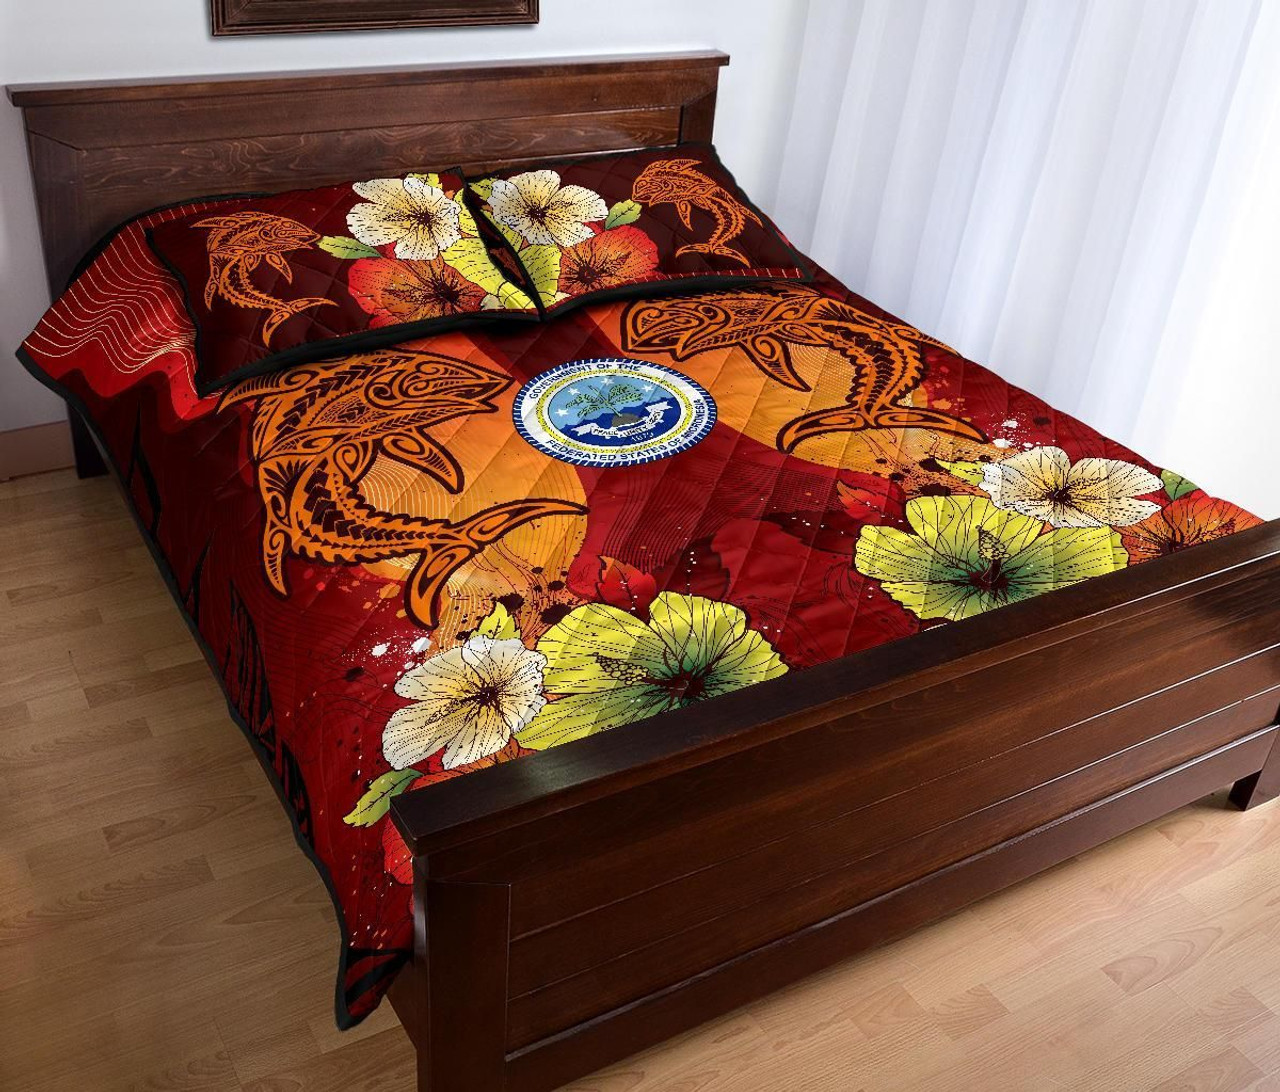 Federated States Of Micronesia Quilt Bed Sets - Tribal Tuna Fish 1